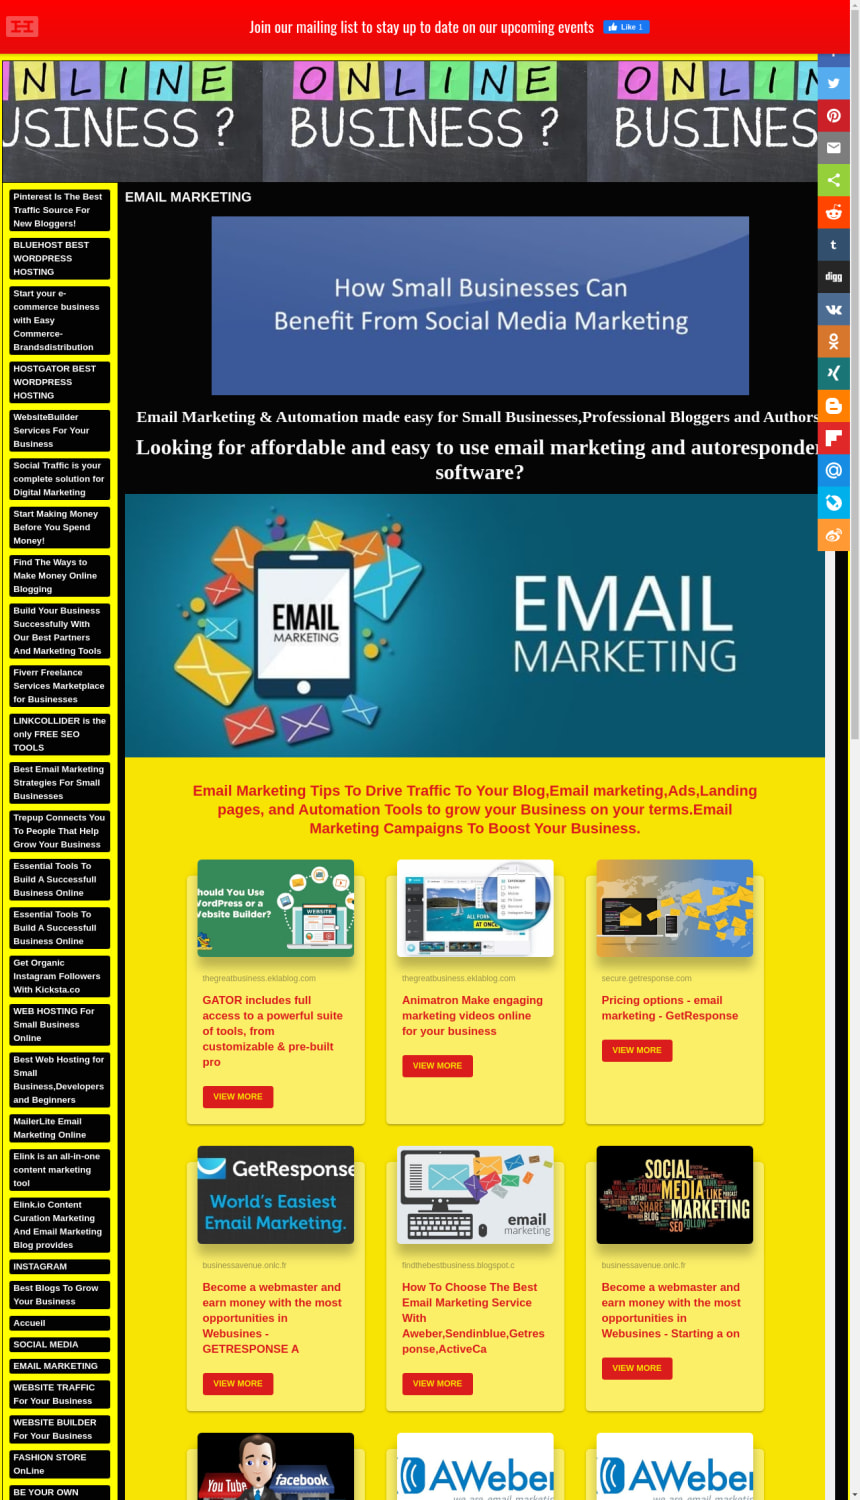 TheGreatBazar.Best Business OnLine For You - EMAIL MARKETING